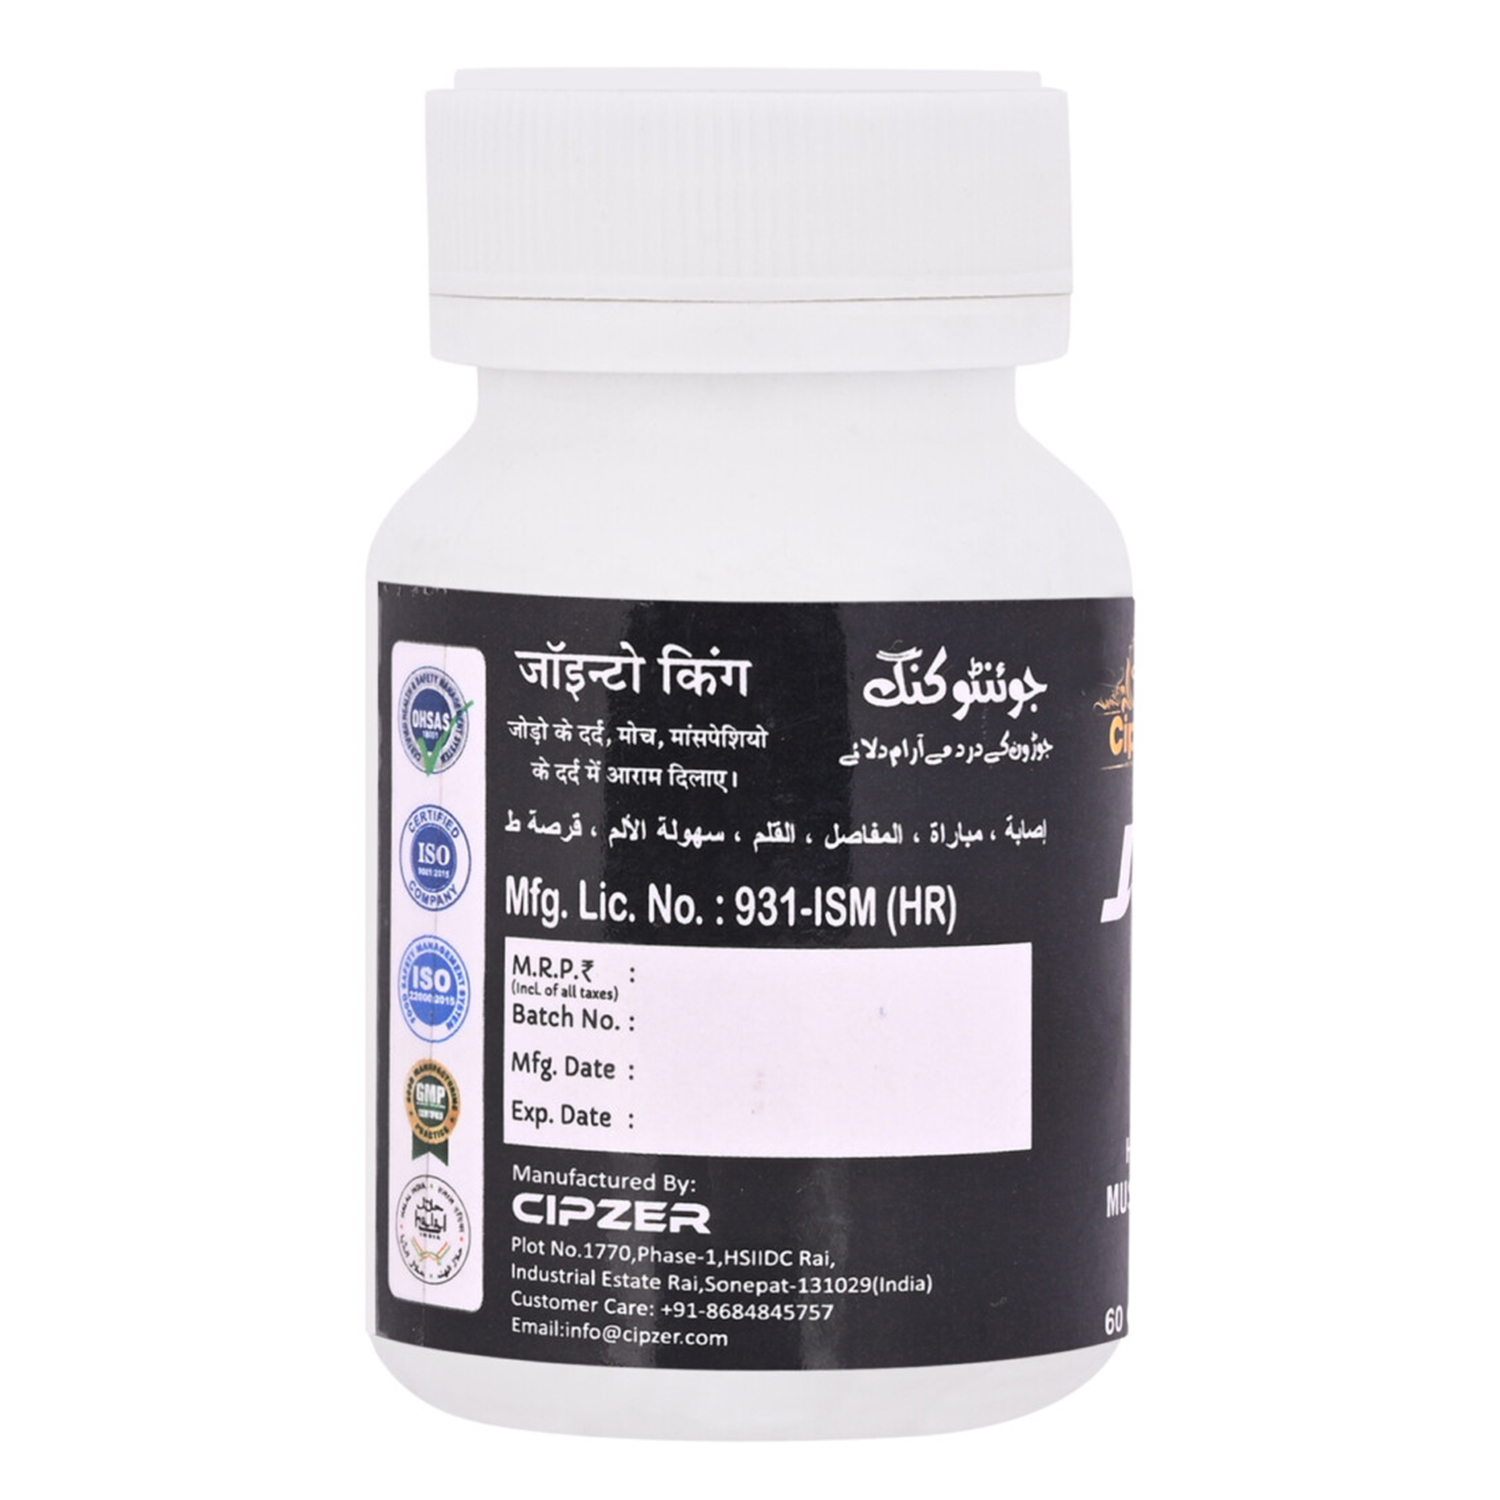 Buy Cipzer Jointo King Capsule at Best Price Online